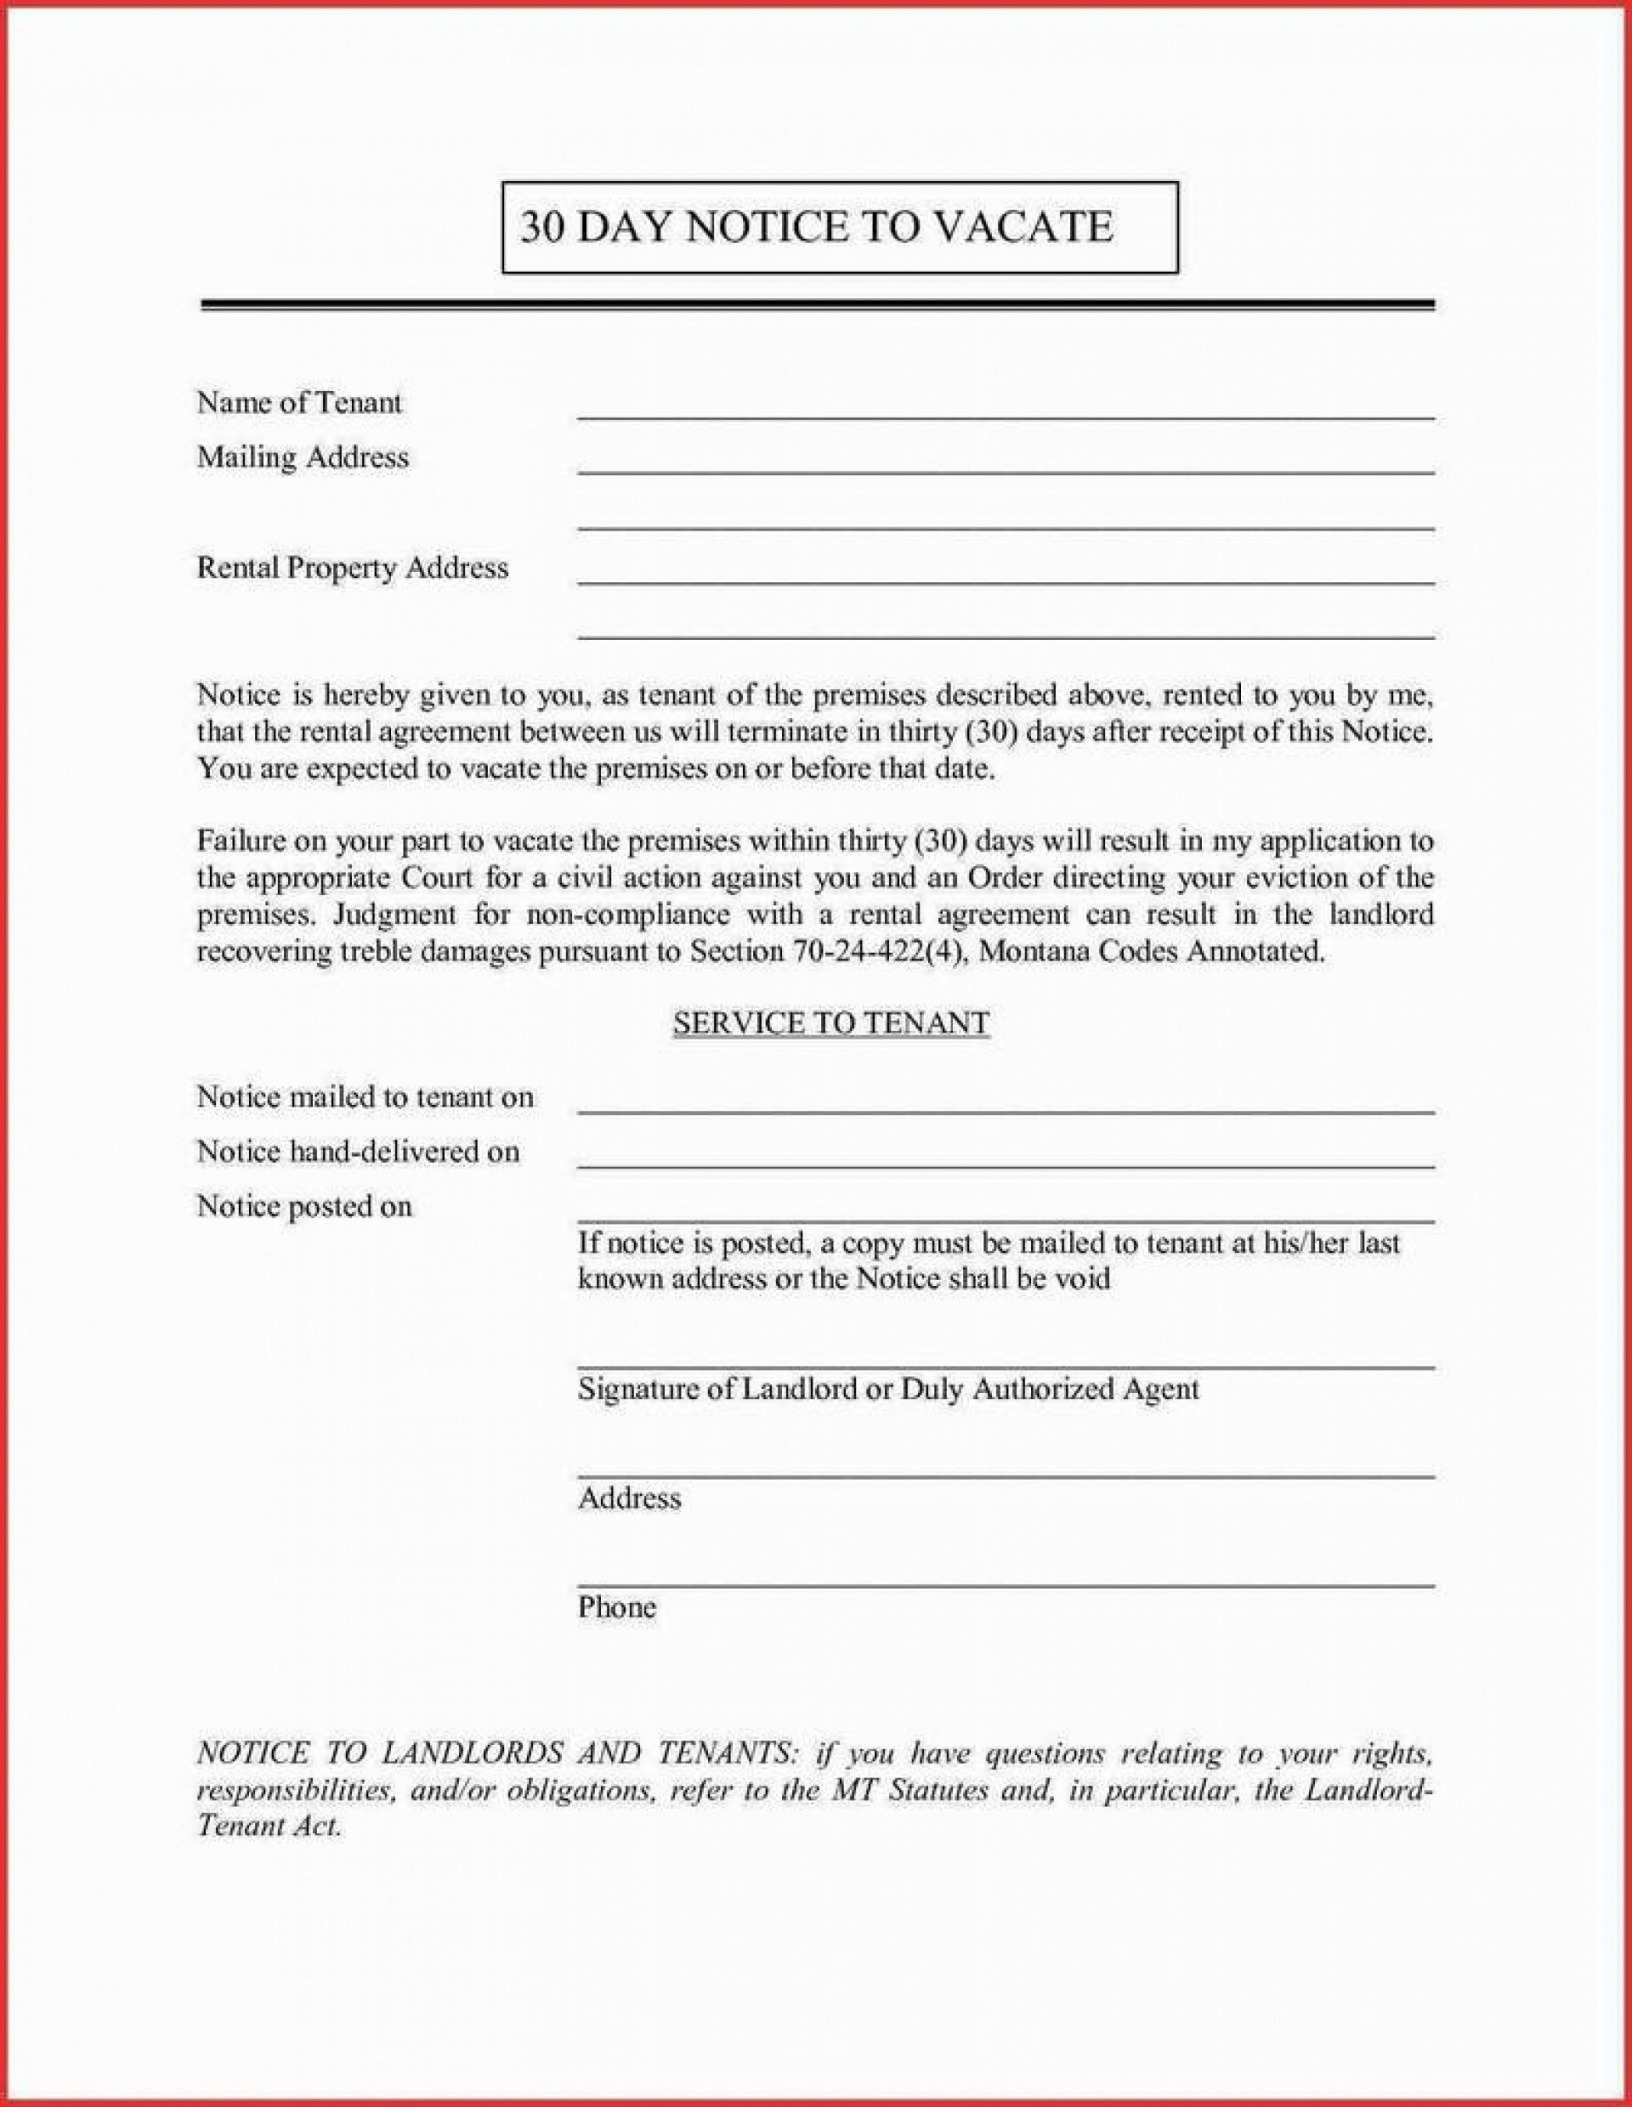 Best 30 Day Notice From Tenant To Landlord Template  Sample